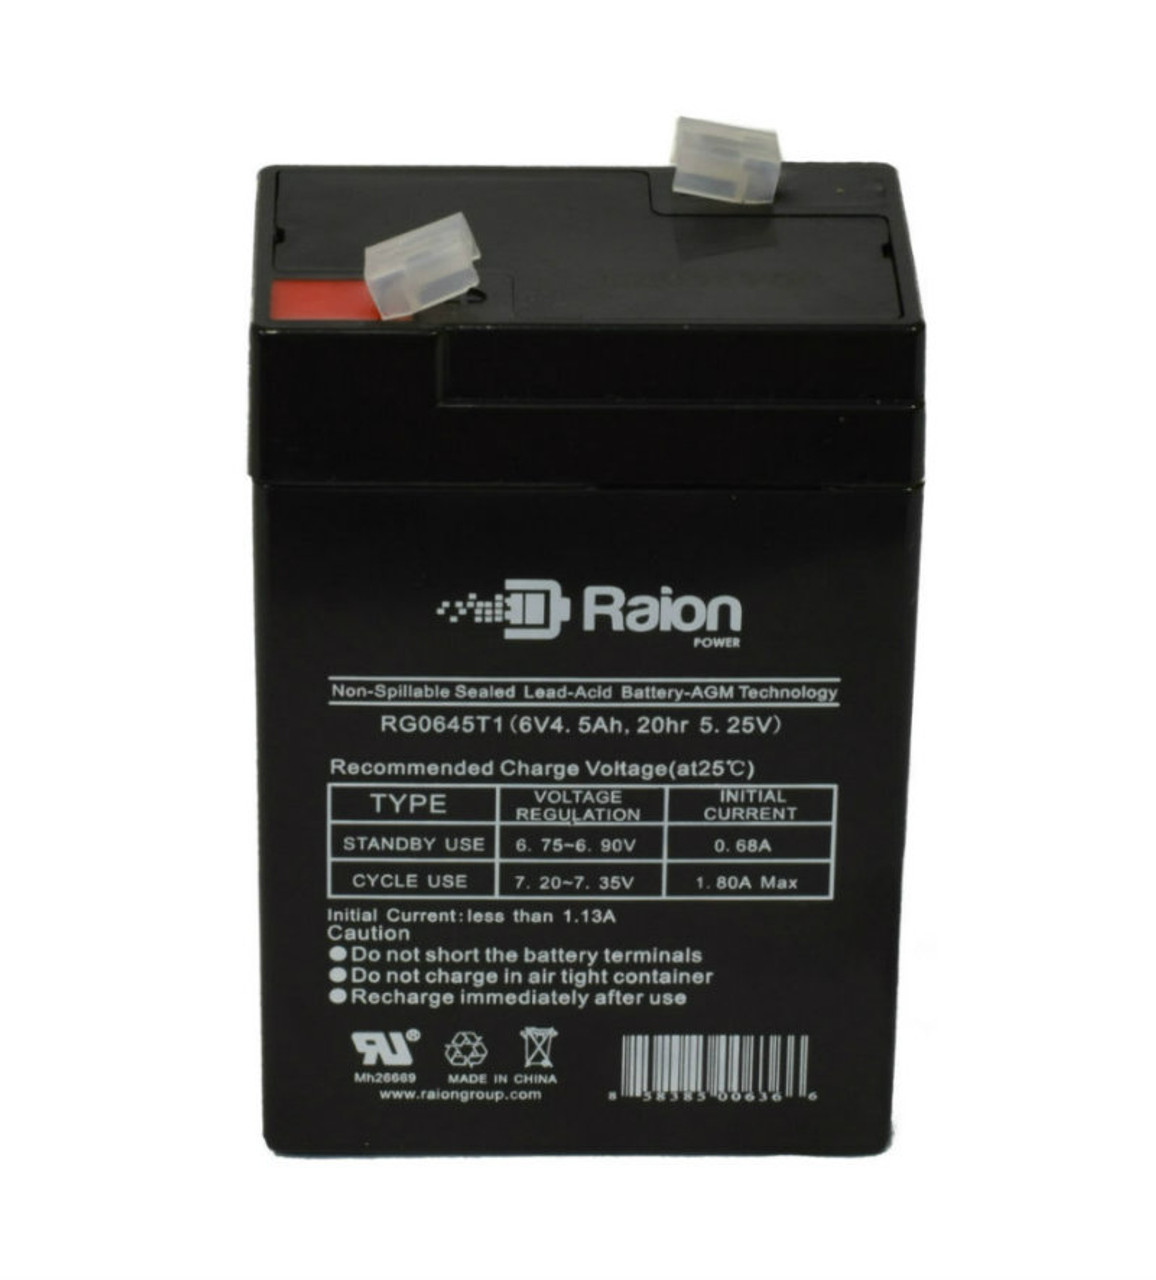 Raion Power RG0645T1 Replacement Battery Cartridge for PBQ 4.5-6